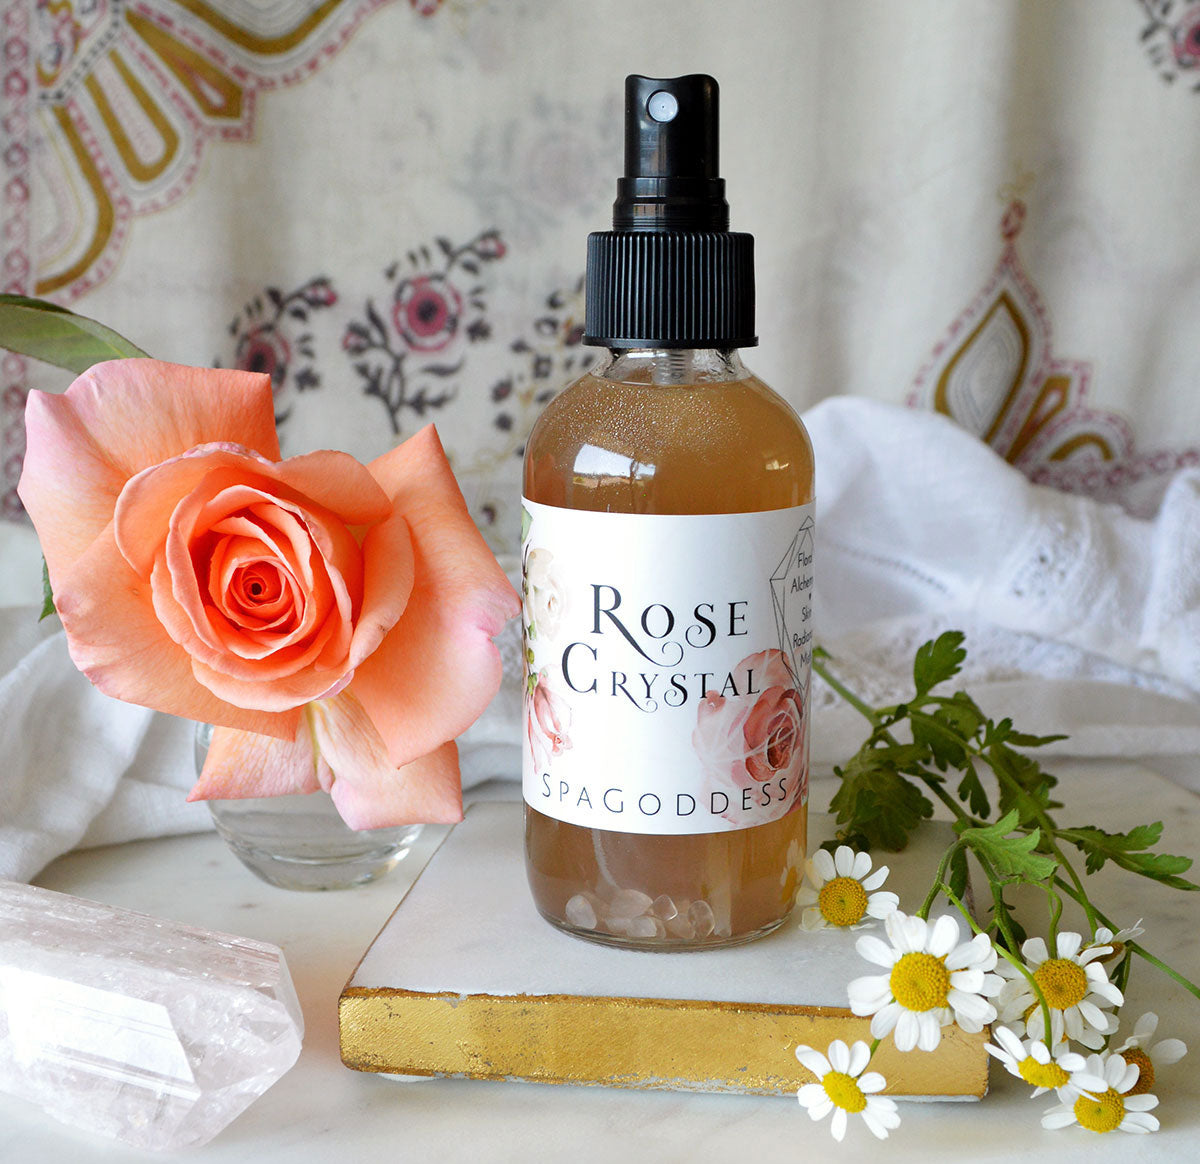 ROSE CRYSTAL HYDRATING RADIANCE MIST infused with Rose Quartz Crystals by SpaGoddess Apothecary